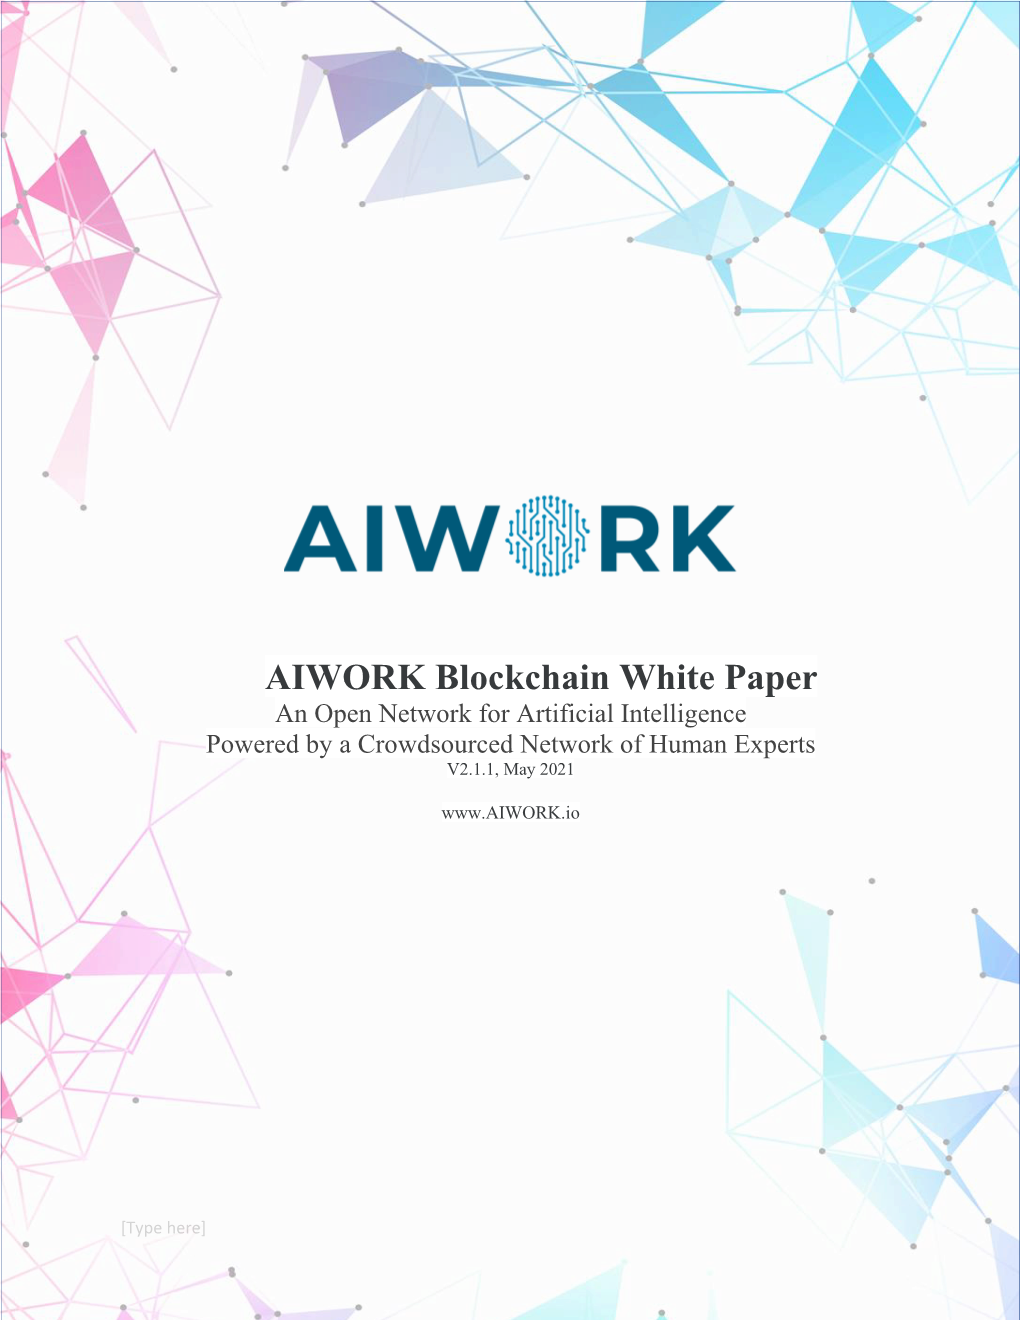 AIWORK Blockchain White Paper an Open Network for Artificial Intelligence Powered by a Crowdsourced Network of Human Experts V2.1.1, May 2021